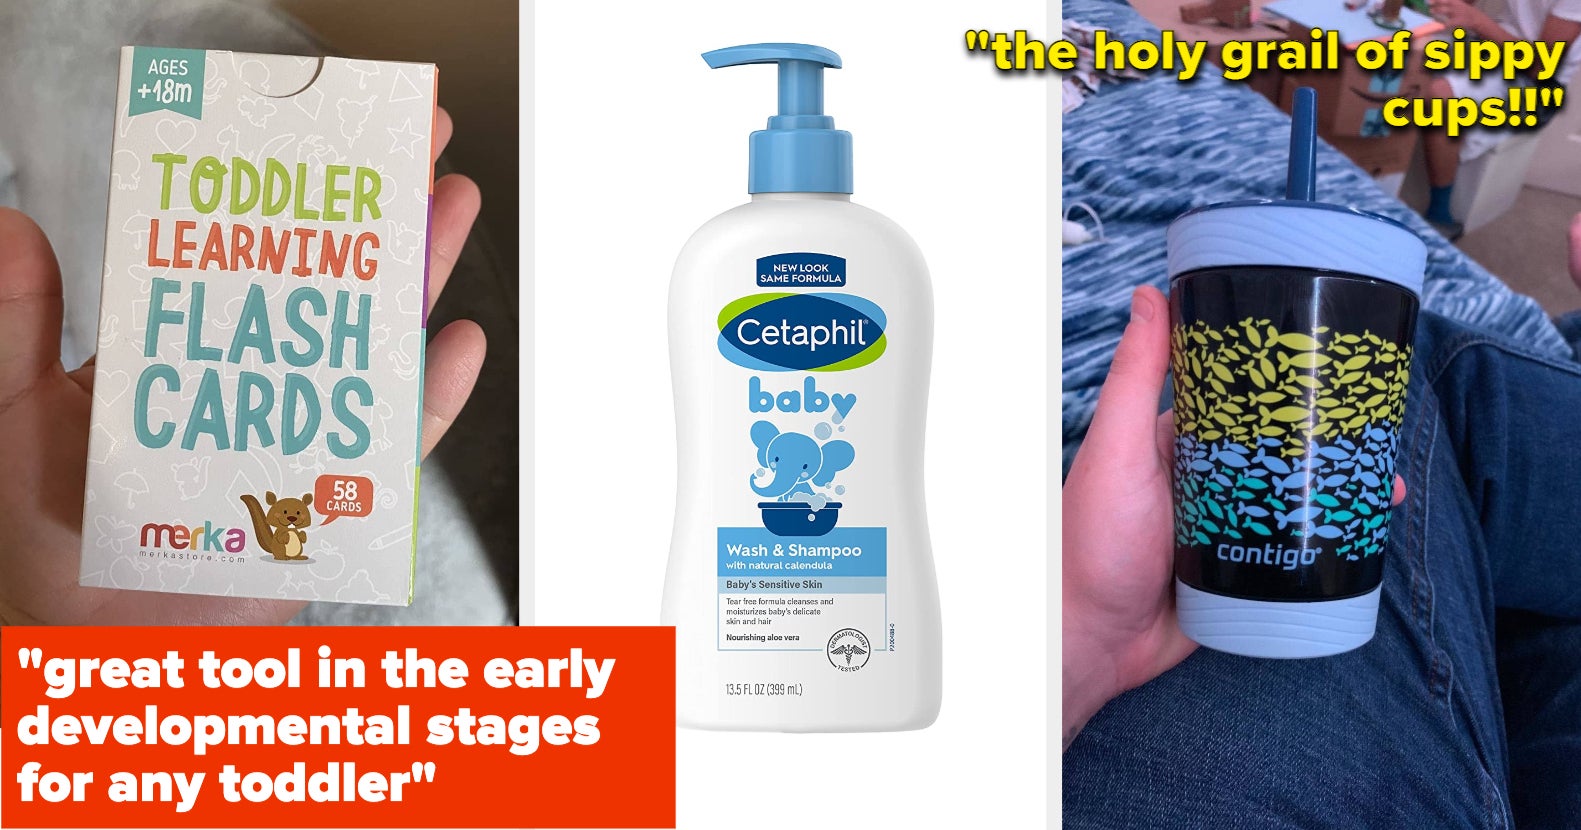 Living in Spain: 20 baby products every parent should know about